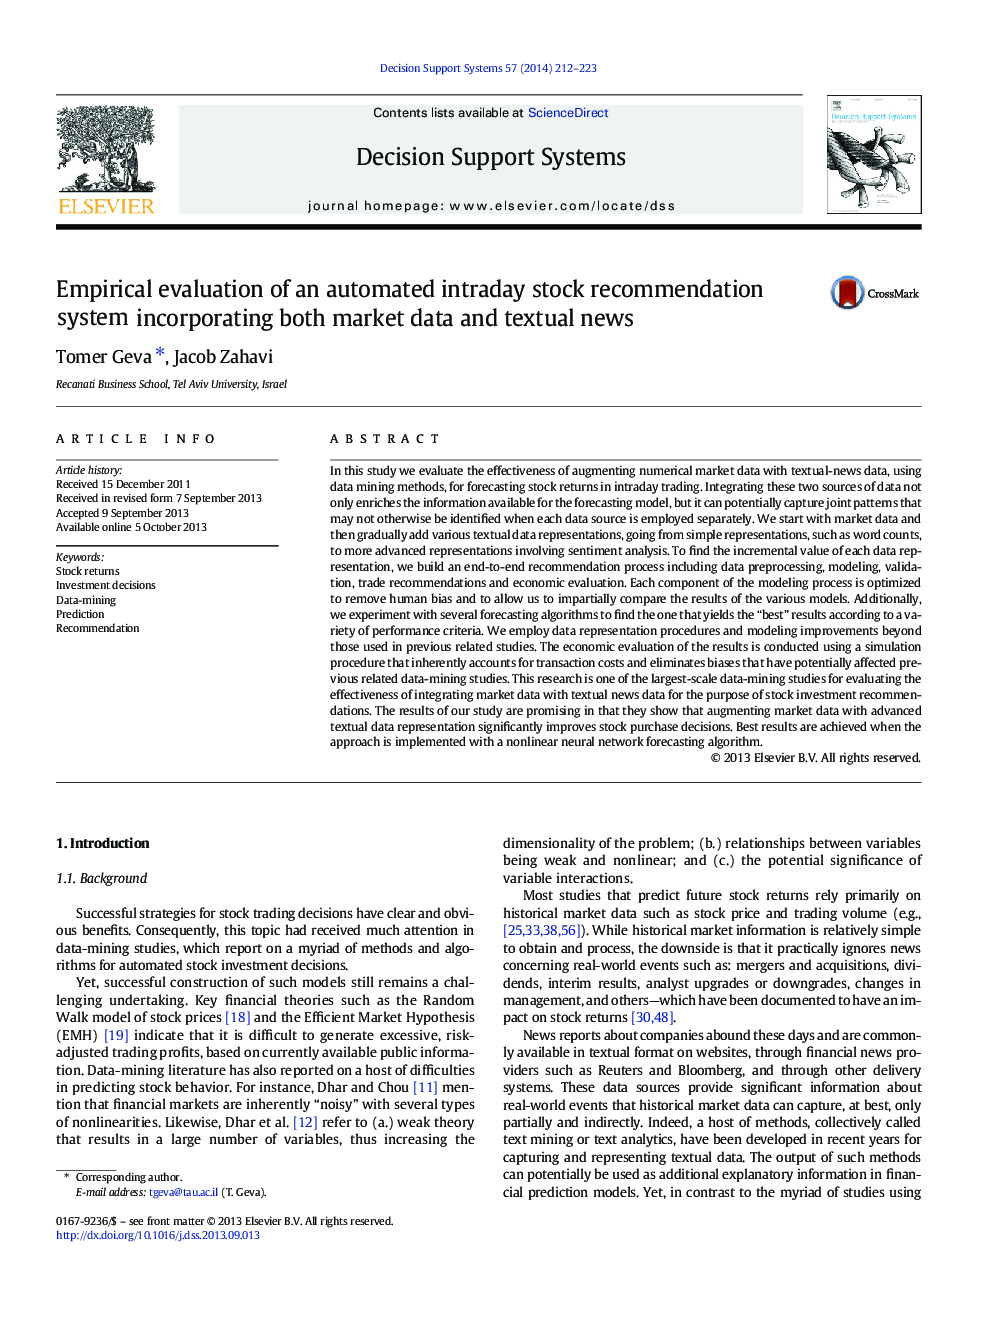 Empirical evaluation of an automated intraday stock recommendation system incorporating both market data and textual news